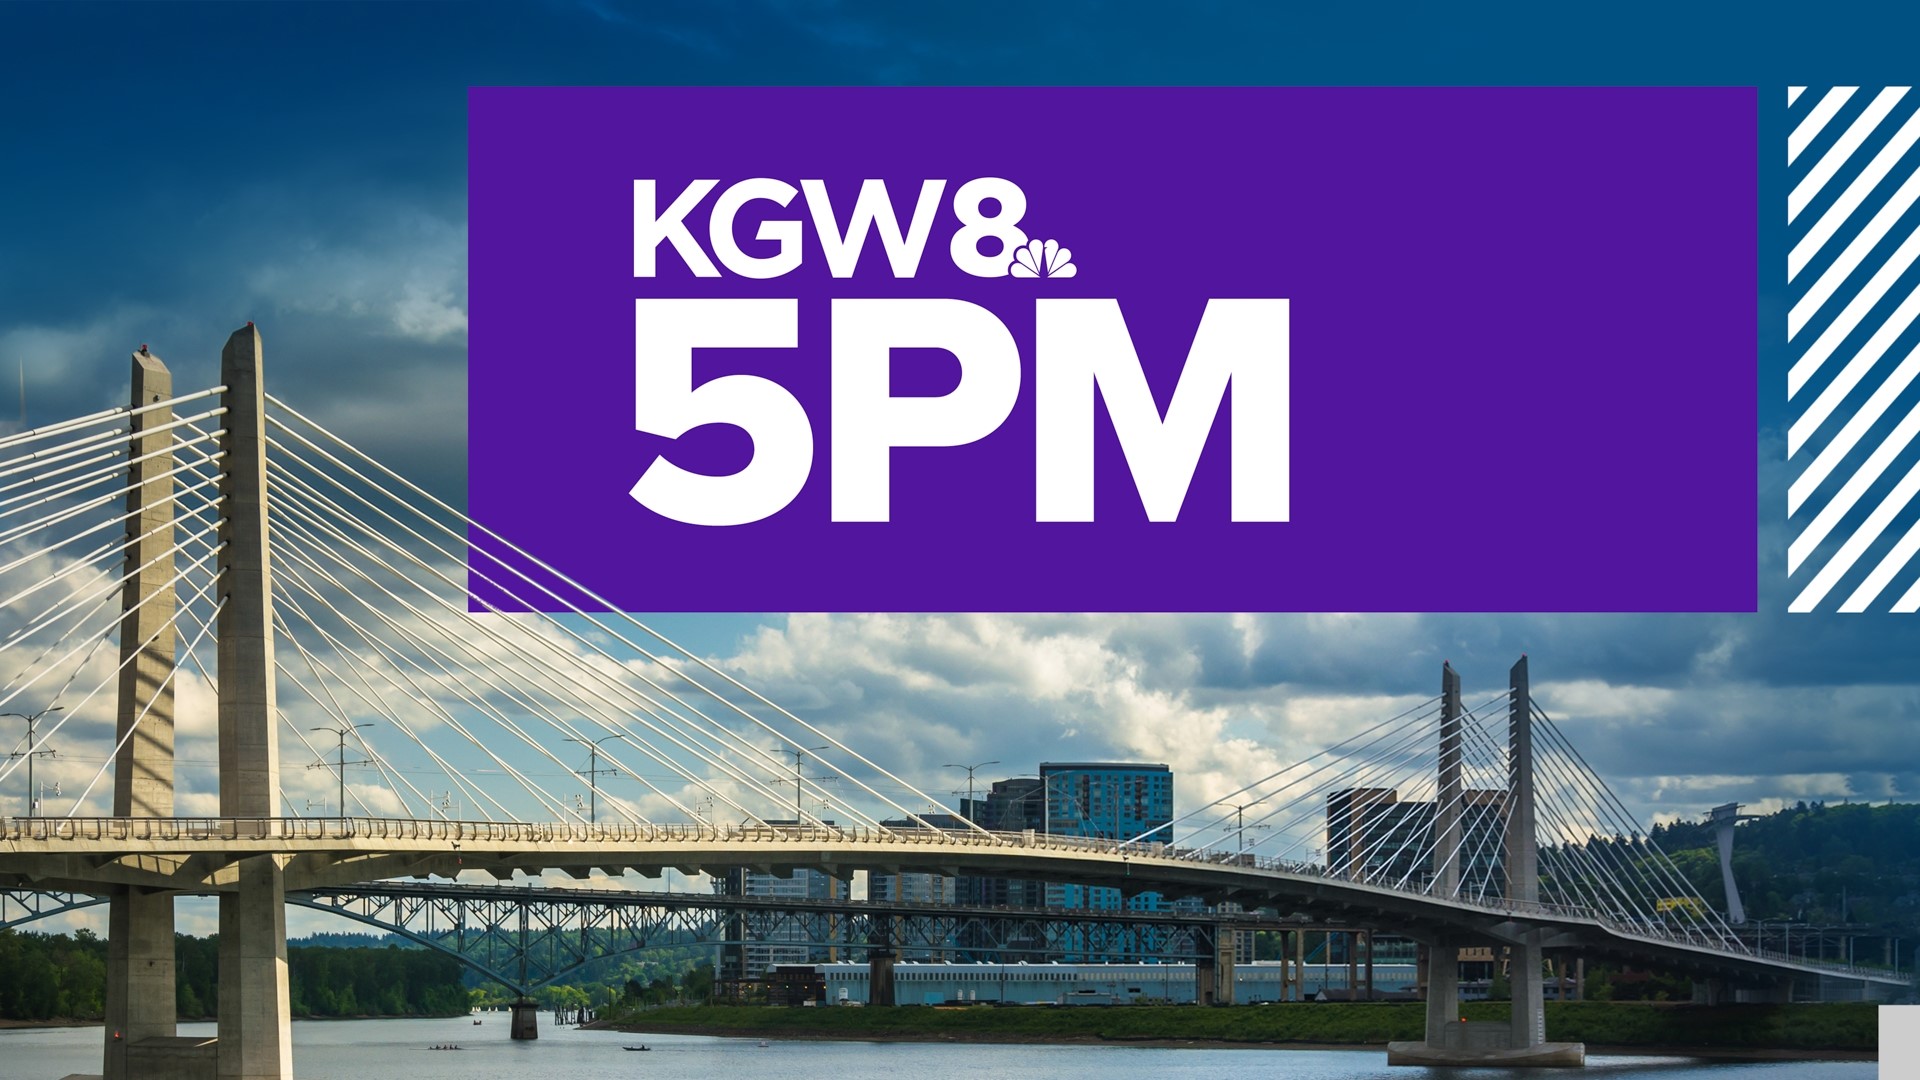 Important local news and weather from KGW